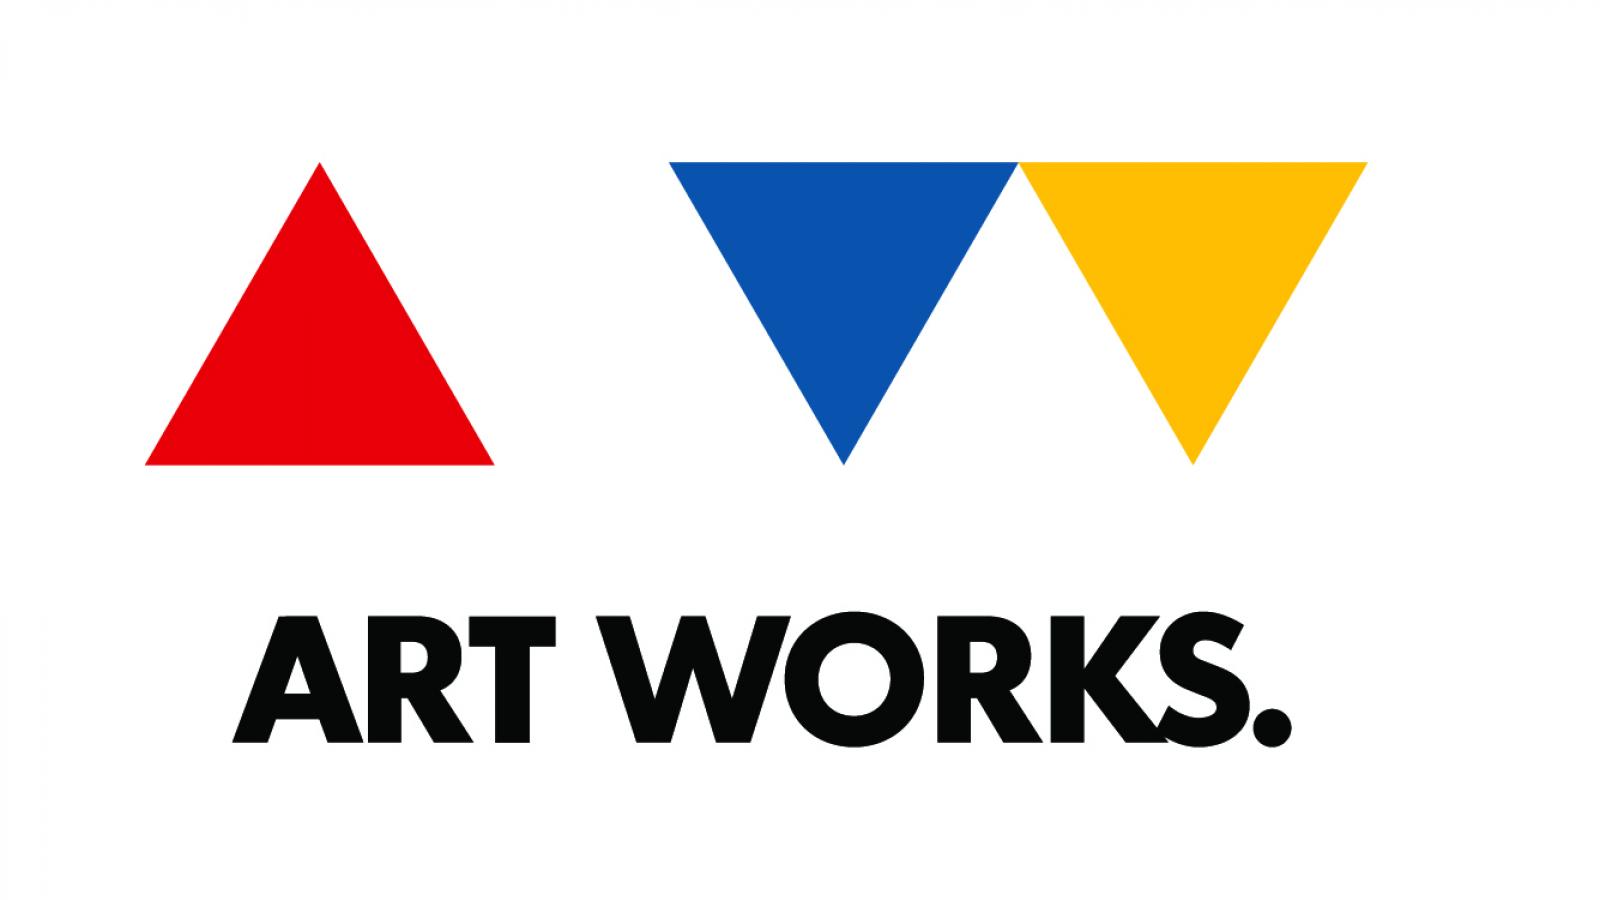 NEA logo. Three triangles in red, blue, and yellow with "Art Works." underneath.